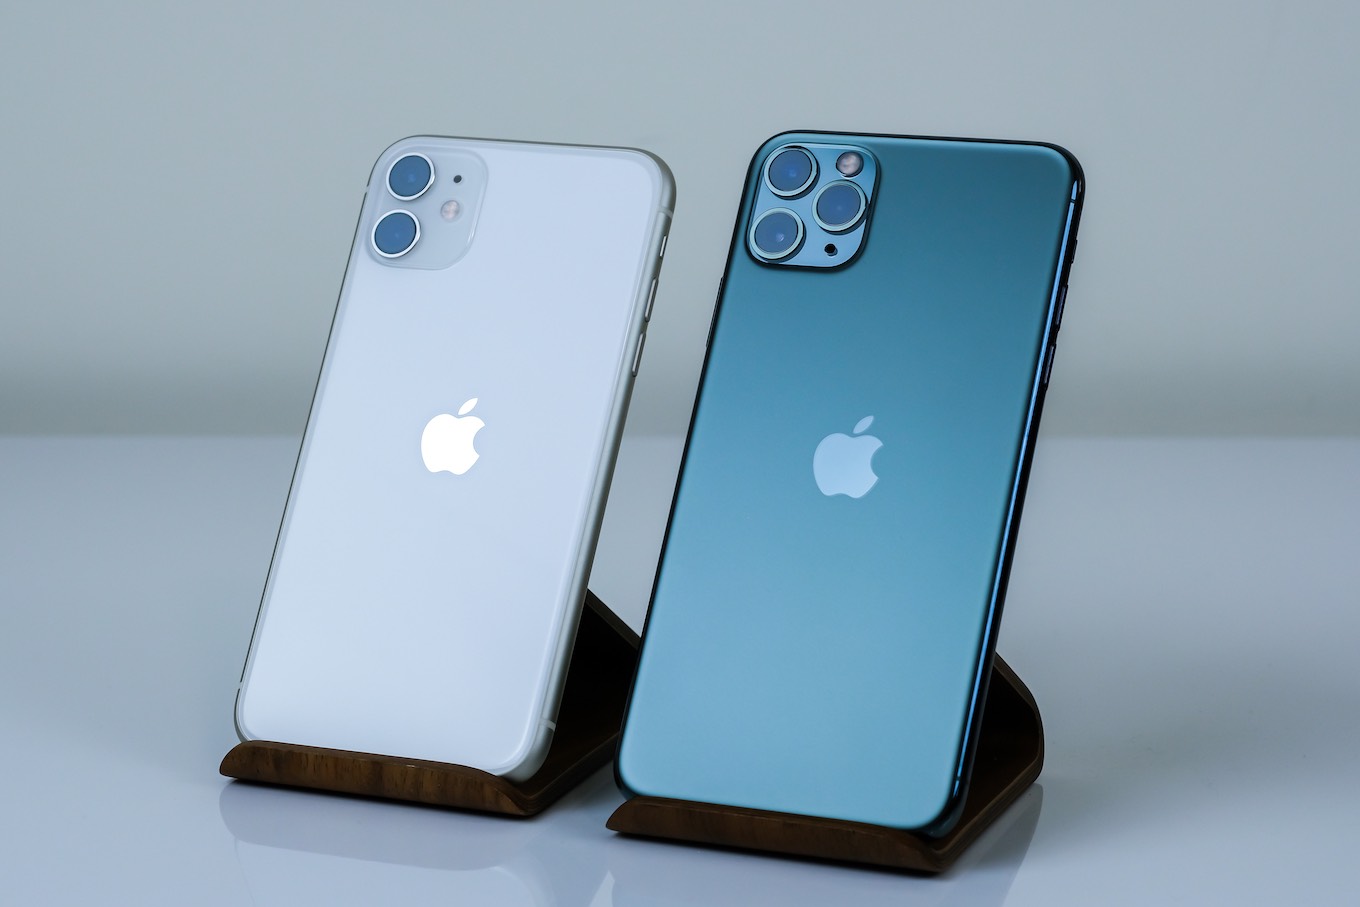 iPhone 11 next to iPhone 11 Pro Max